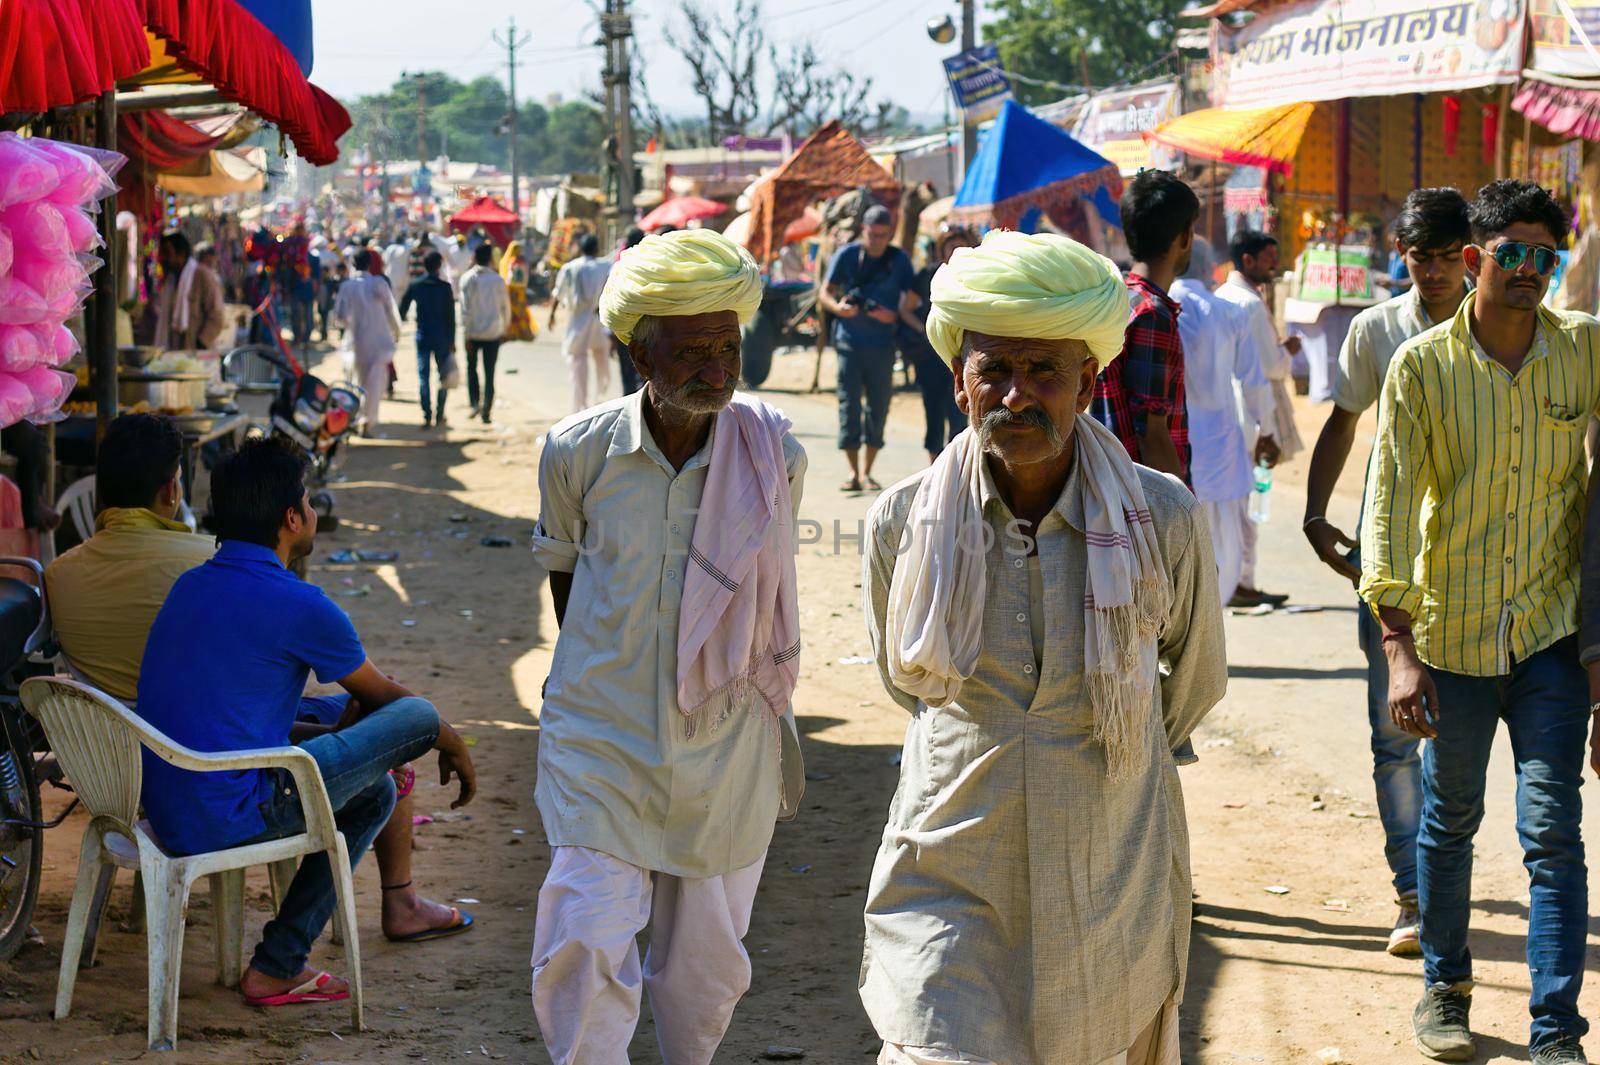 Pushkar, India - November 10, 2016: Couple of local rajasthani old men walking in ethnic wear with turban during famous pushkar fair or mela held annually in Rajasthan state. by arpanbhatia